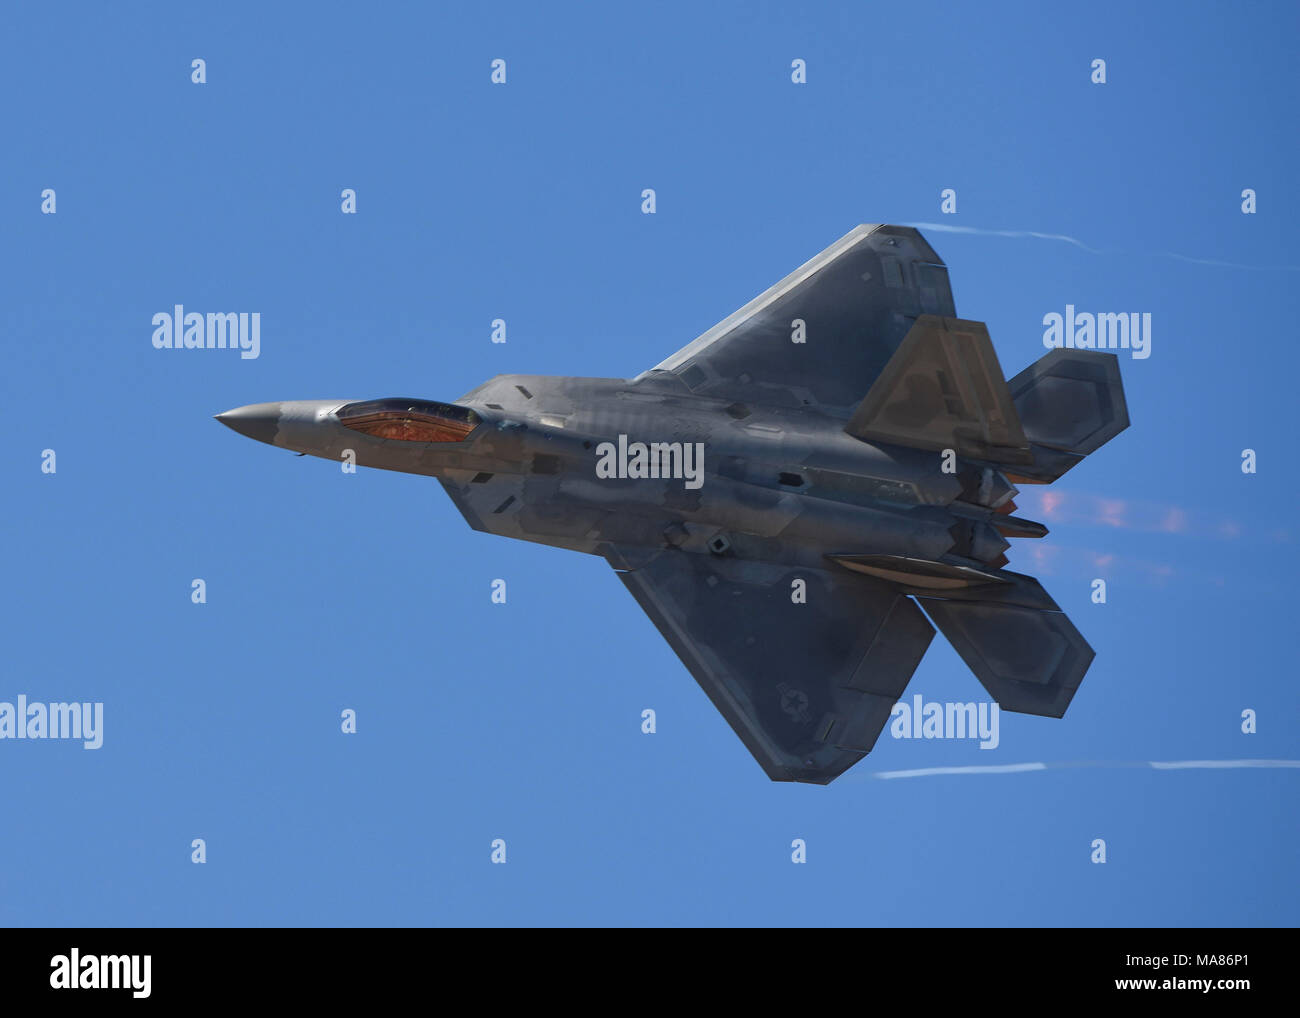 An F-22 Raptor flies a performance demonstration during the 2018 Los Angeles Air Show in Lancaster, Calif., March 23, 2018. The combination of stealth, super cruise, maneuverability, and integrated avionics, coupled with improved supportability allows the Raptor to perform a wide-range of aerial feats. (U.S. Air Force photo by Senior Airman Kaylee Dubois) Stock Photo